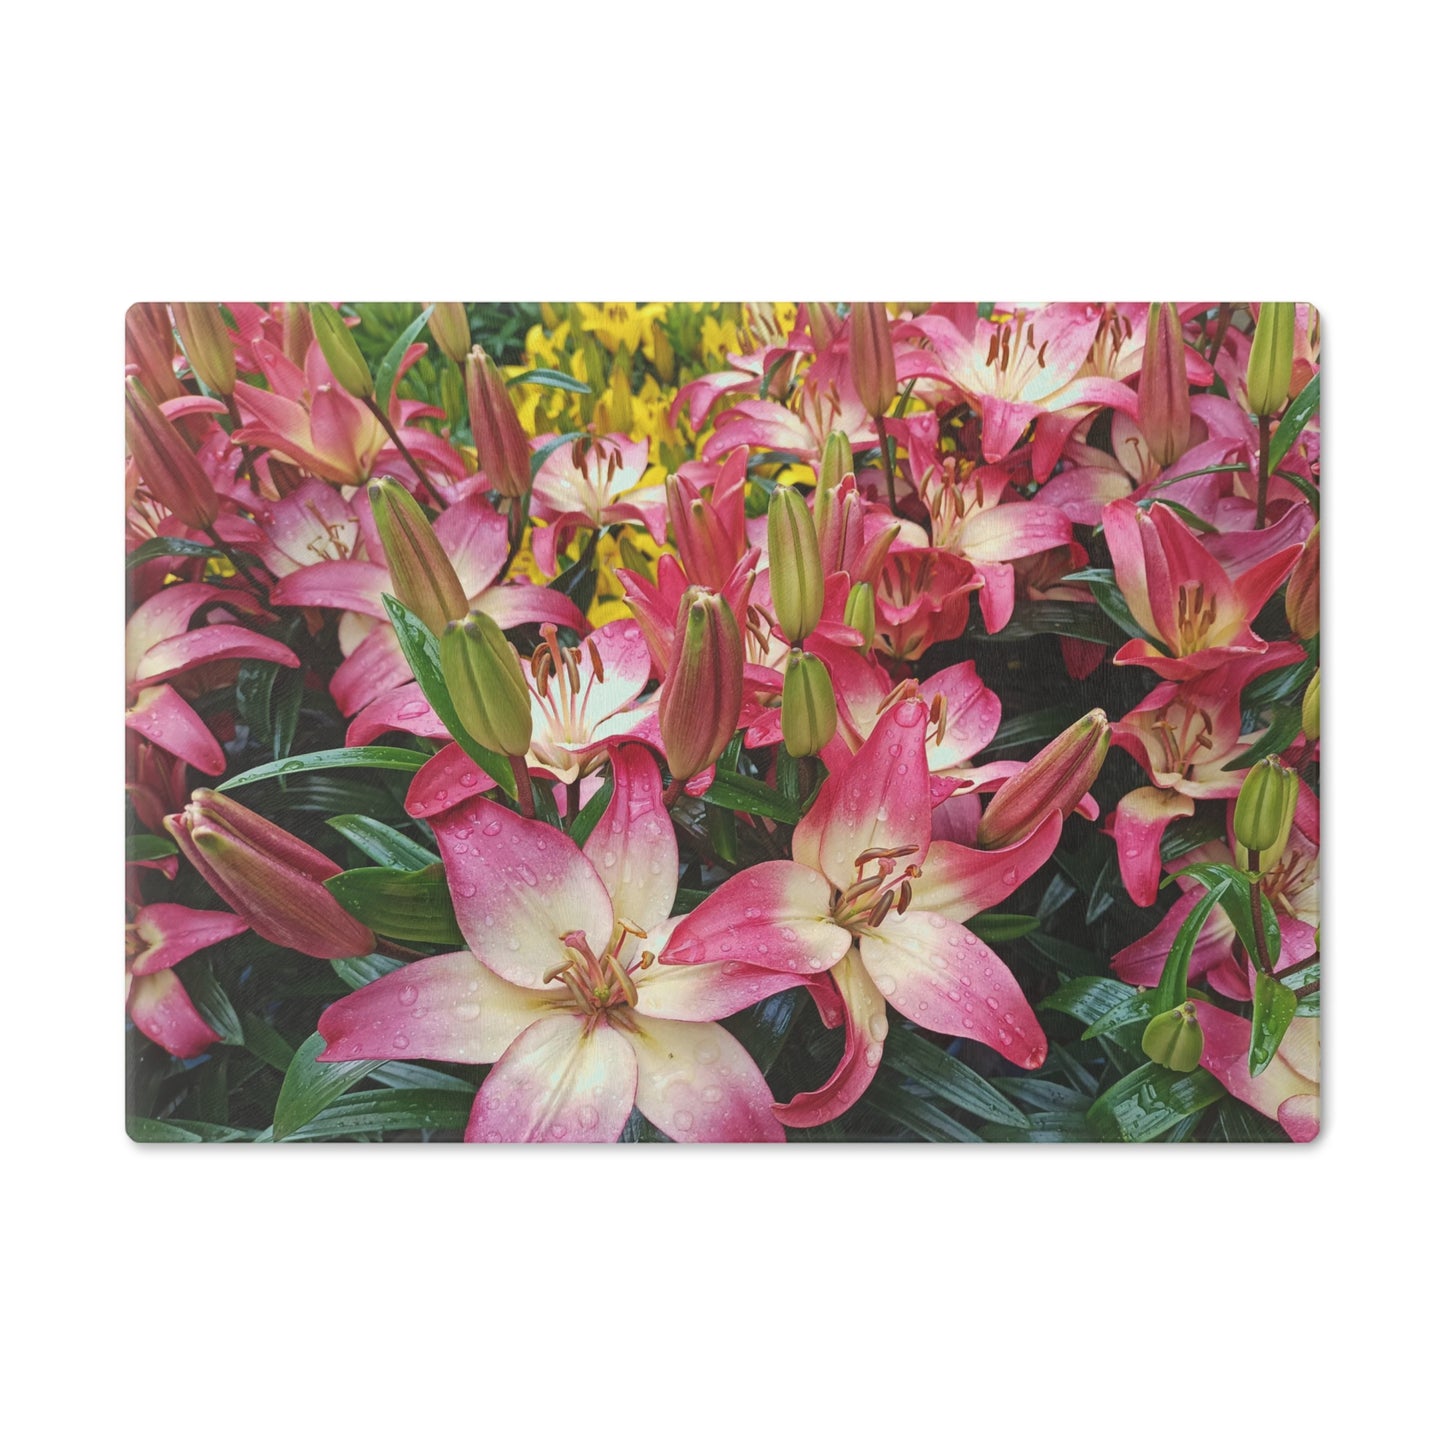 Lovely Lilies Cutting Board Dishwasher Safe